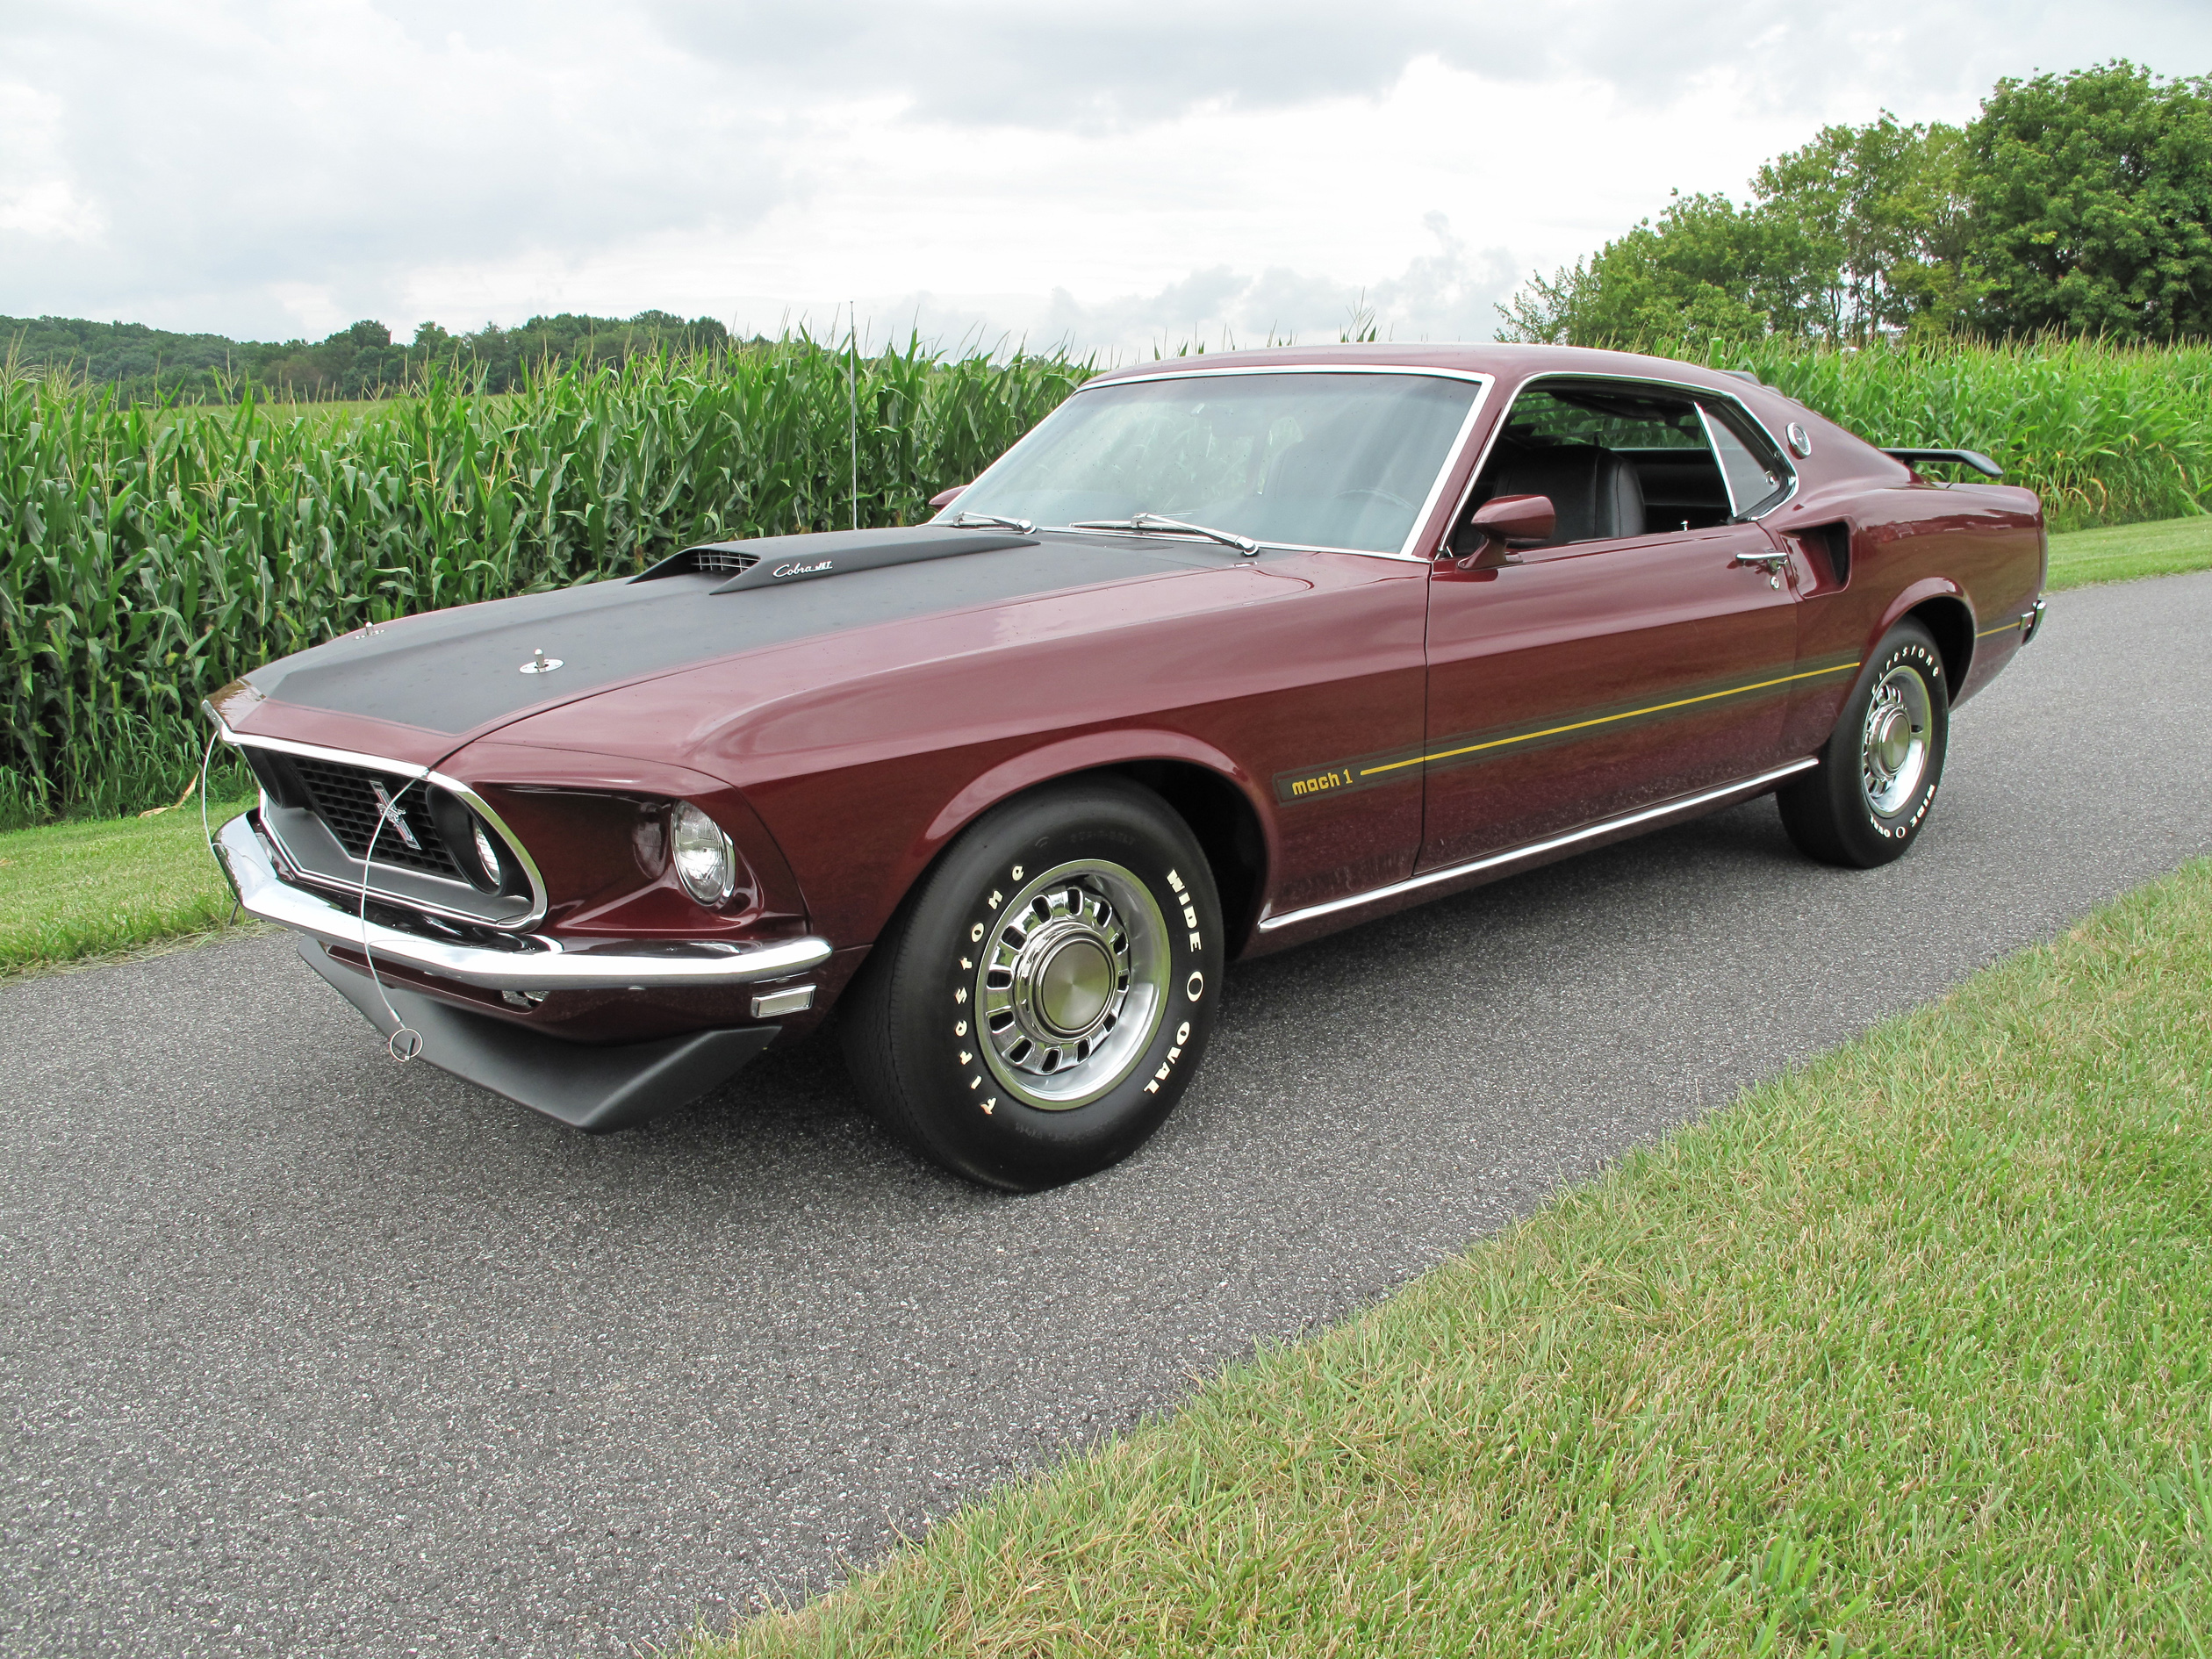 Car Fastback Ford Mustang Mach 1 Muscle Car Red Car 2520x1890